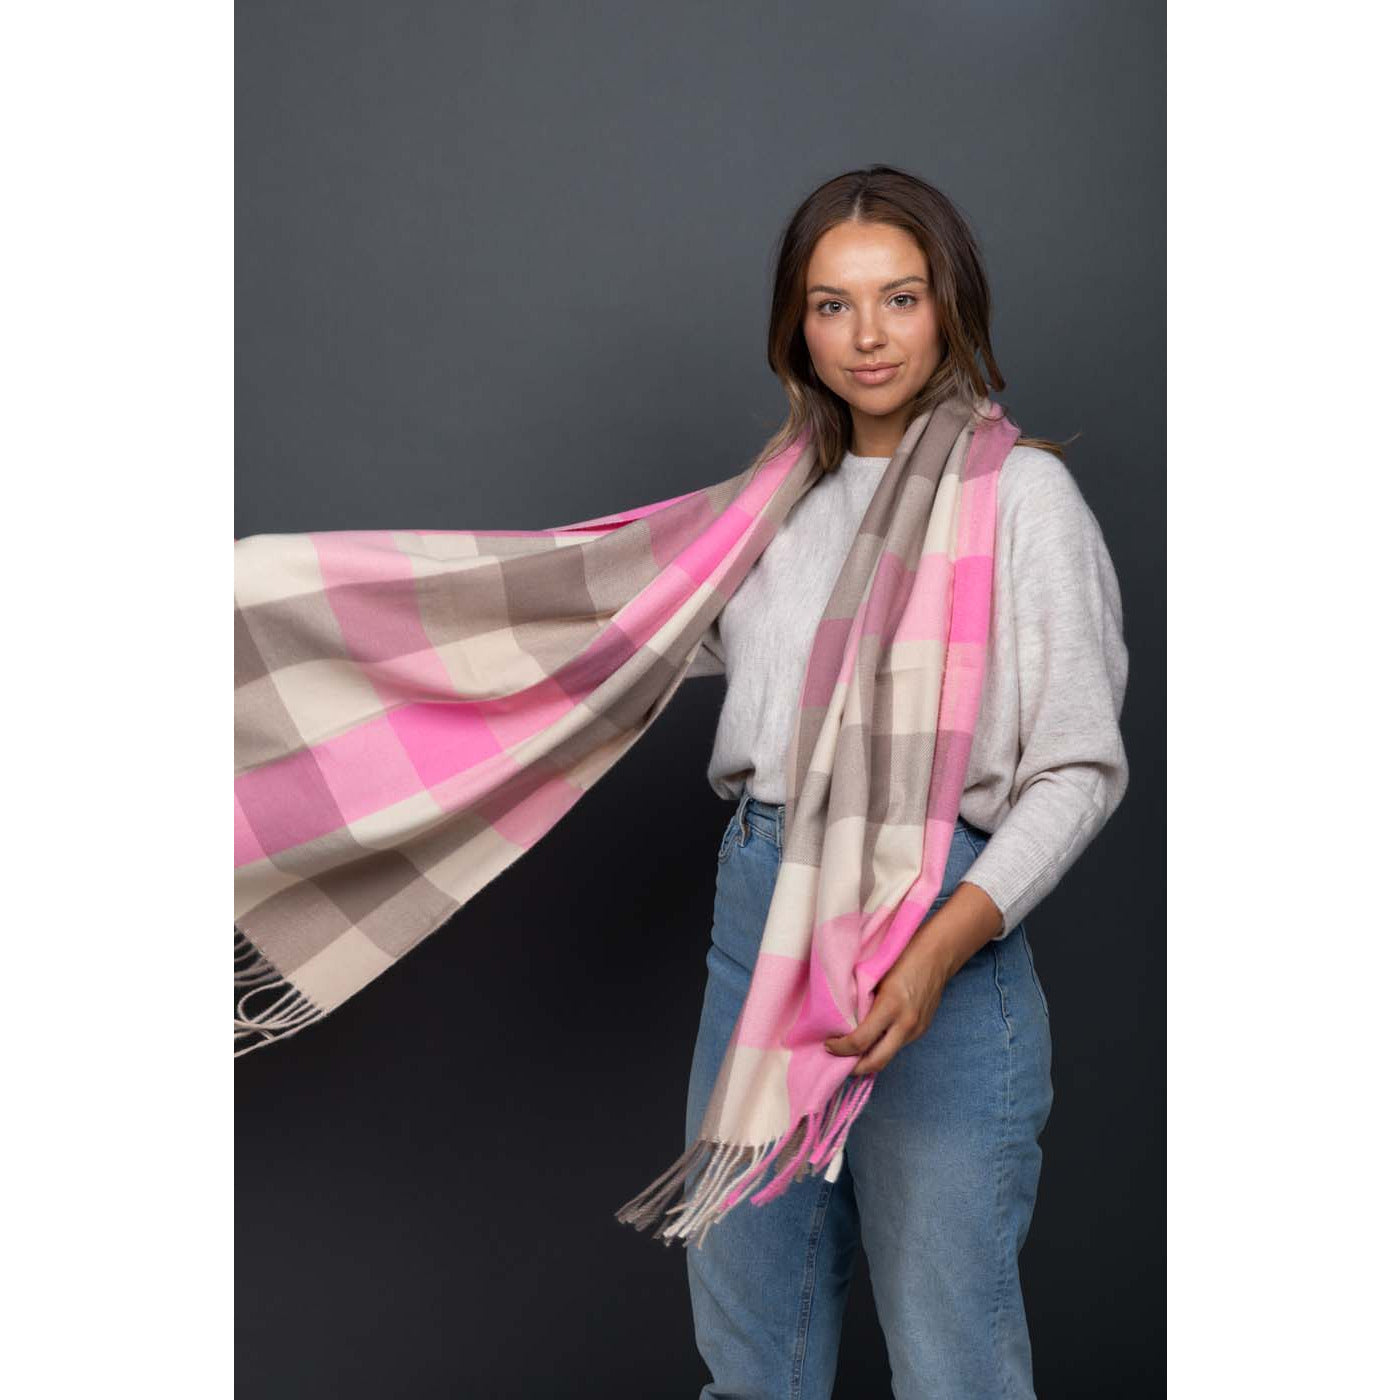 St Belair Check Scarf - Pink & Taupe